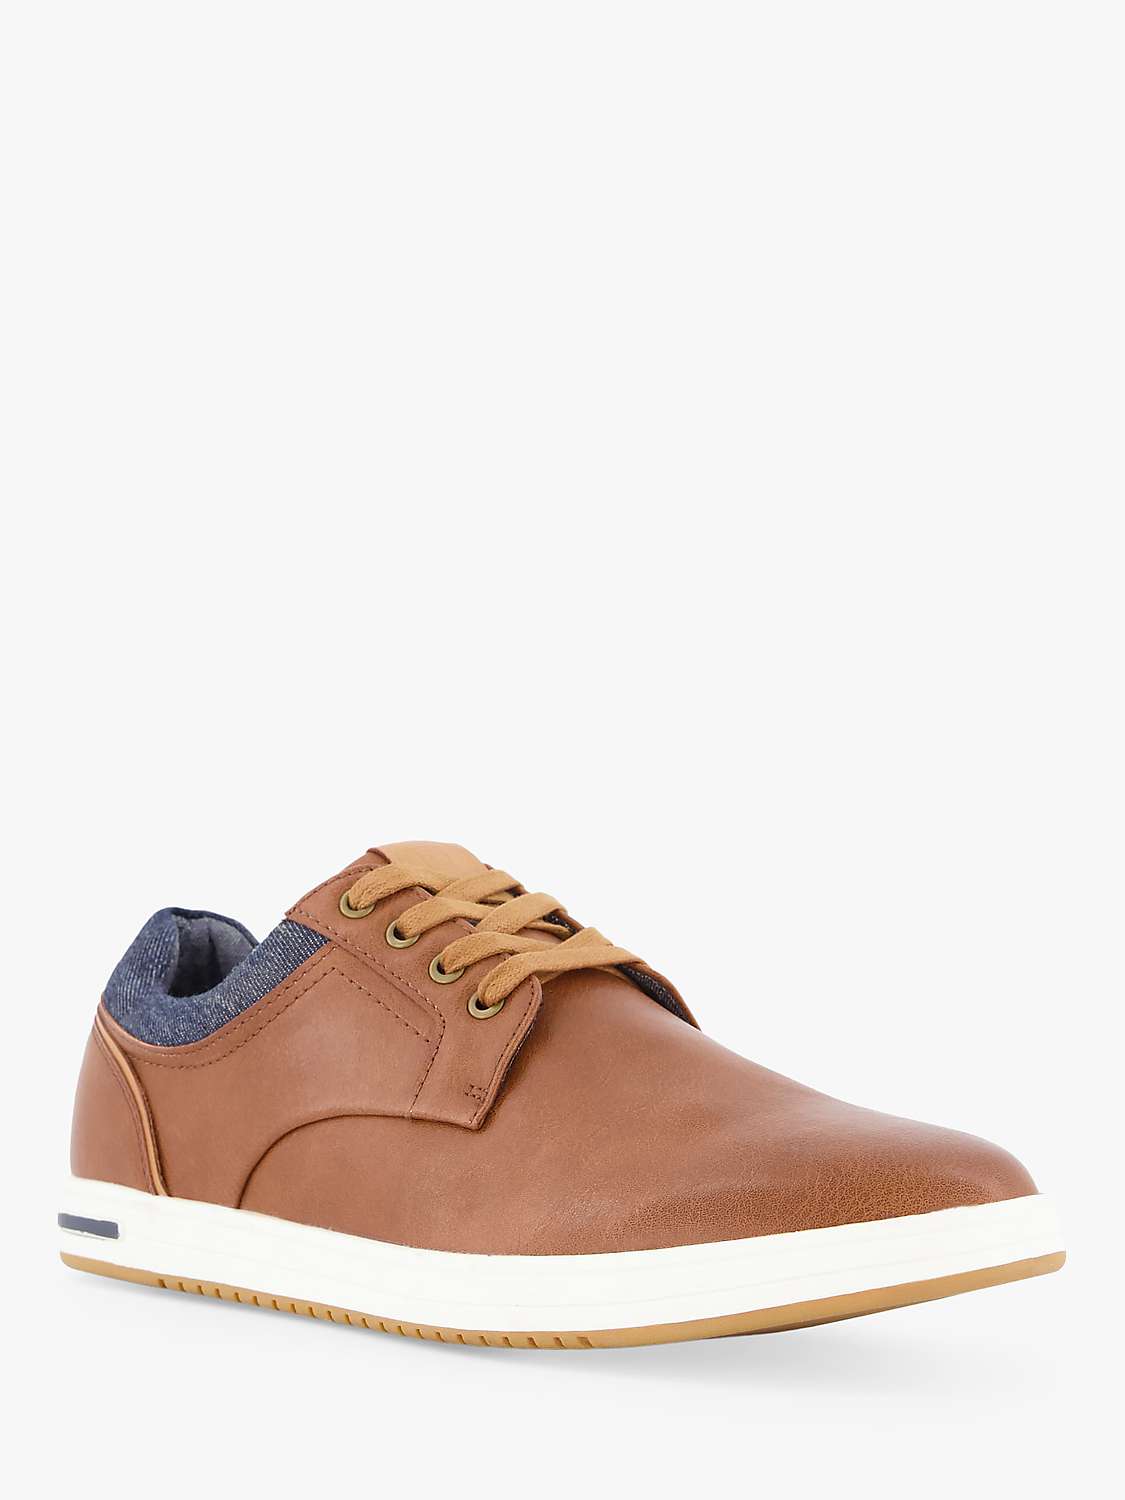 Buy Dune Trip Textured Trainers, Tan Online at johnlewis.com